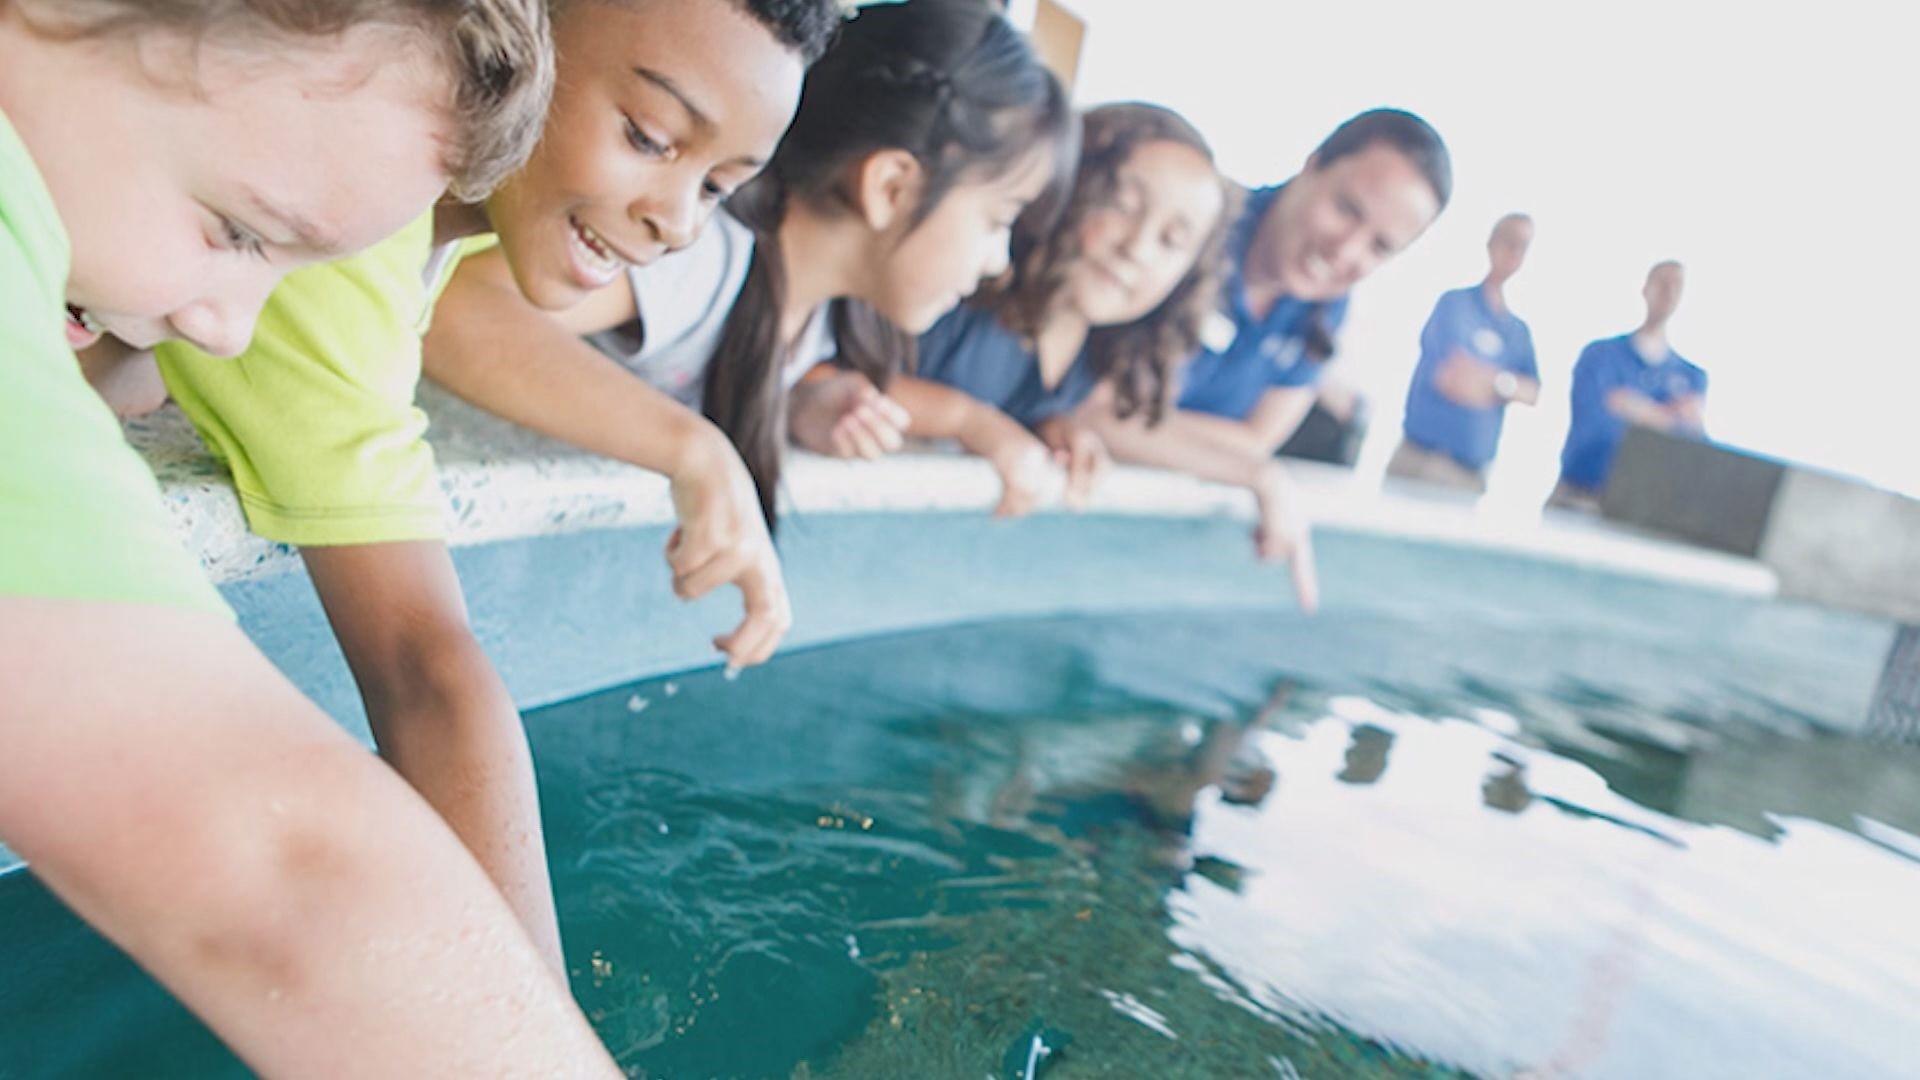 Looking for a good thing to do with your family? Come take a trip down to Patriots Point and the South Carolina Aquarium.